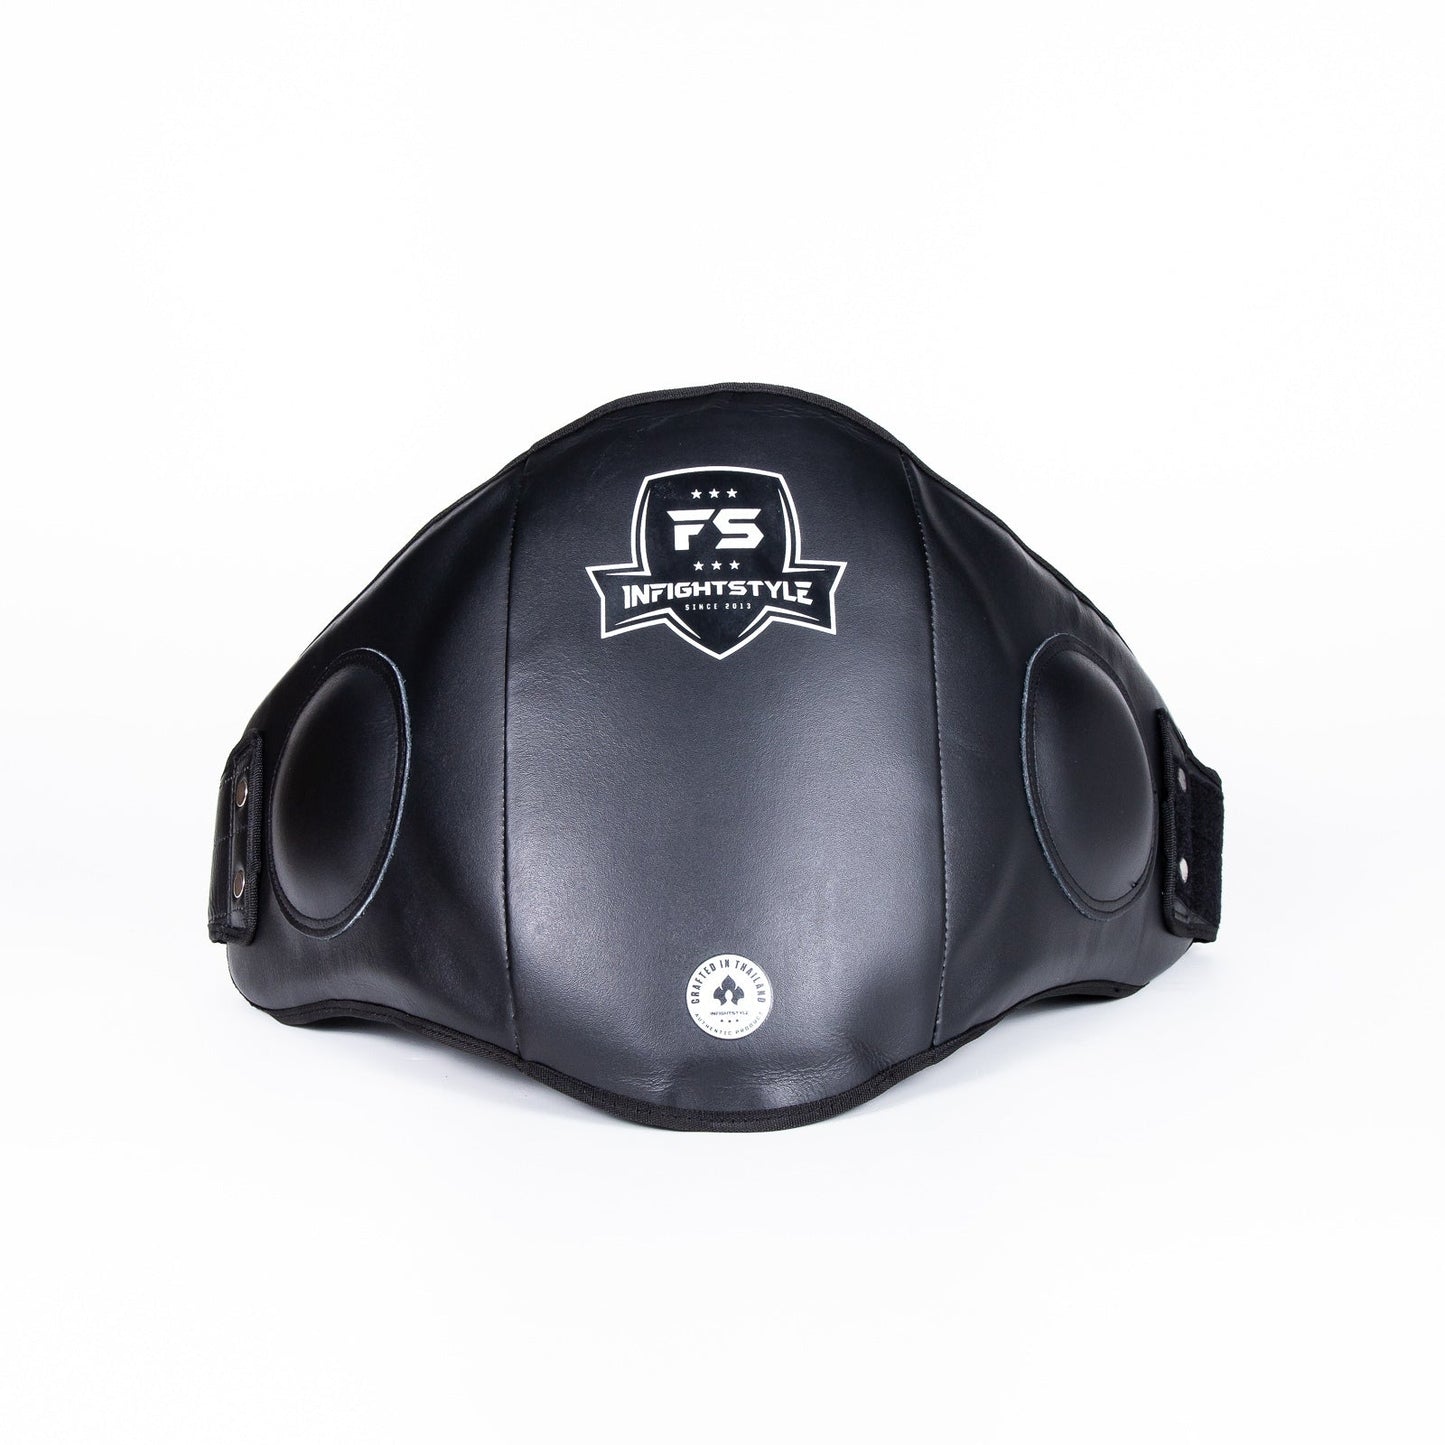 INFIGHTSTYLE BELLY PROTECTION  LEATHER HOOK-AND-LOOP